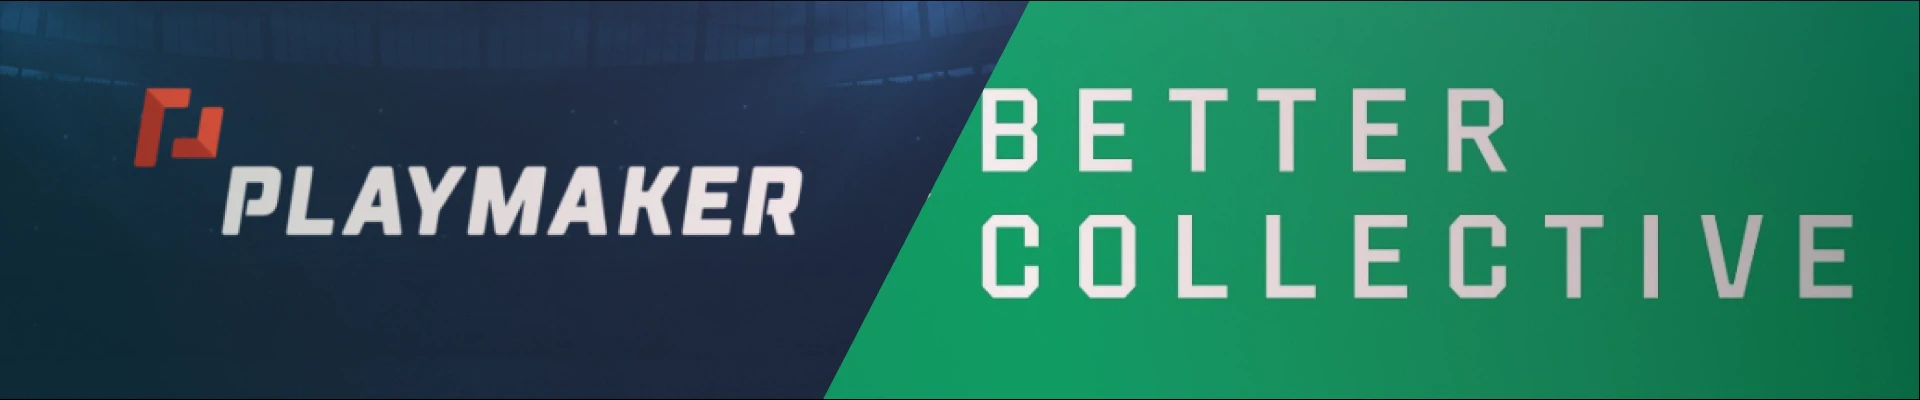 Better Collective and Playmaker Header